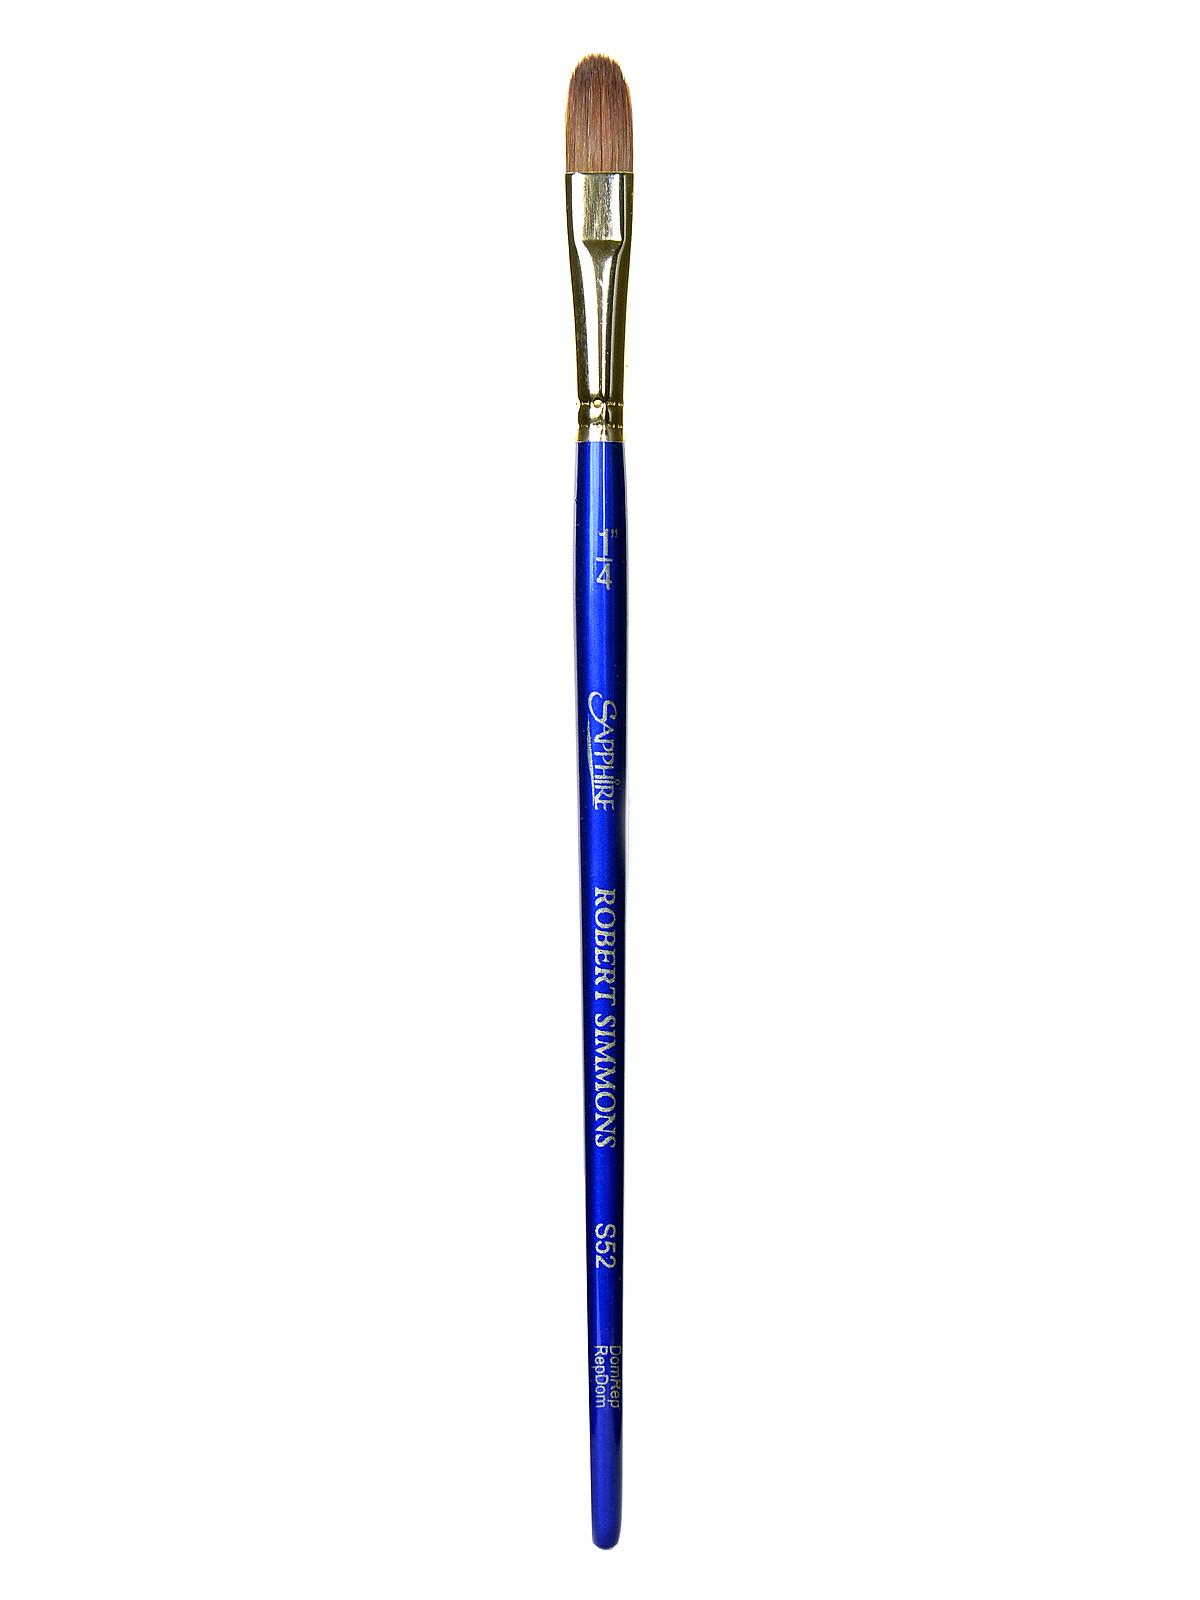 Sapphire Series Synthetic Brushes Short Handle 1 4 Oval Wash S52